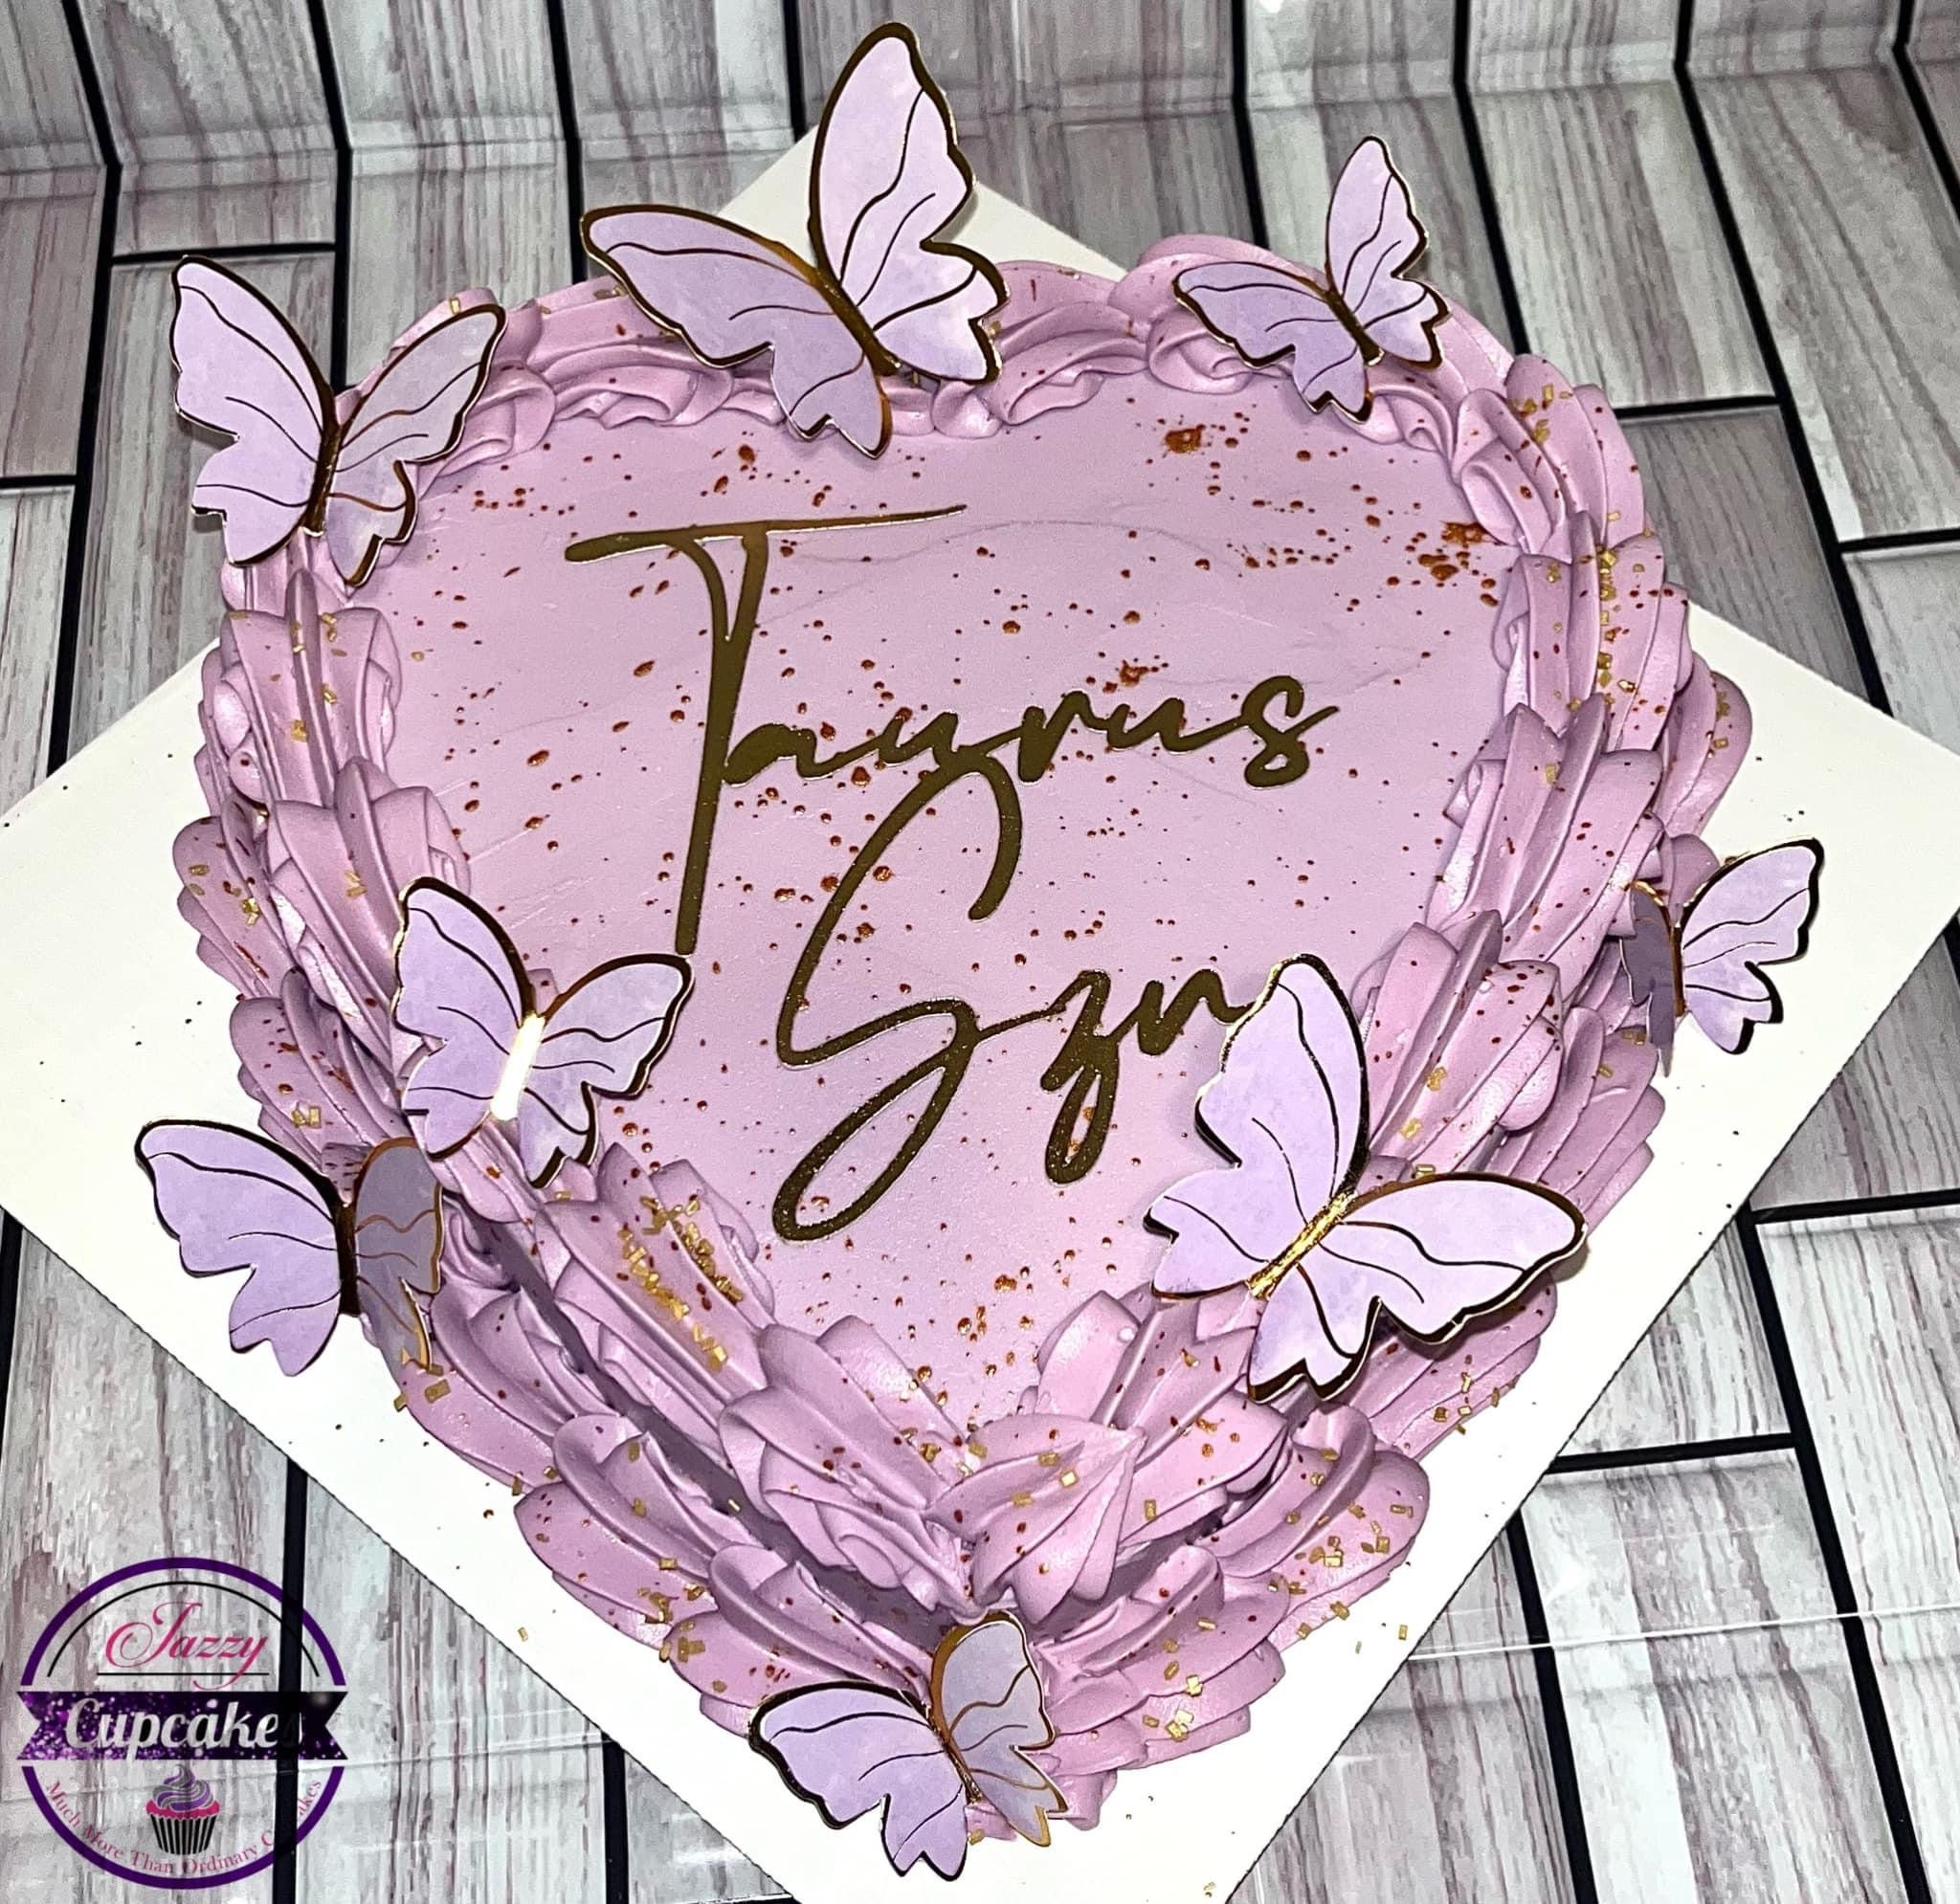 That Girl Lay Lay It's Time to Slay Edible Cake Topper Image ABPID5667 – A  Birthday Place